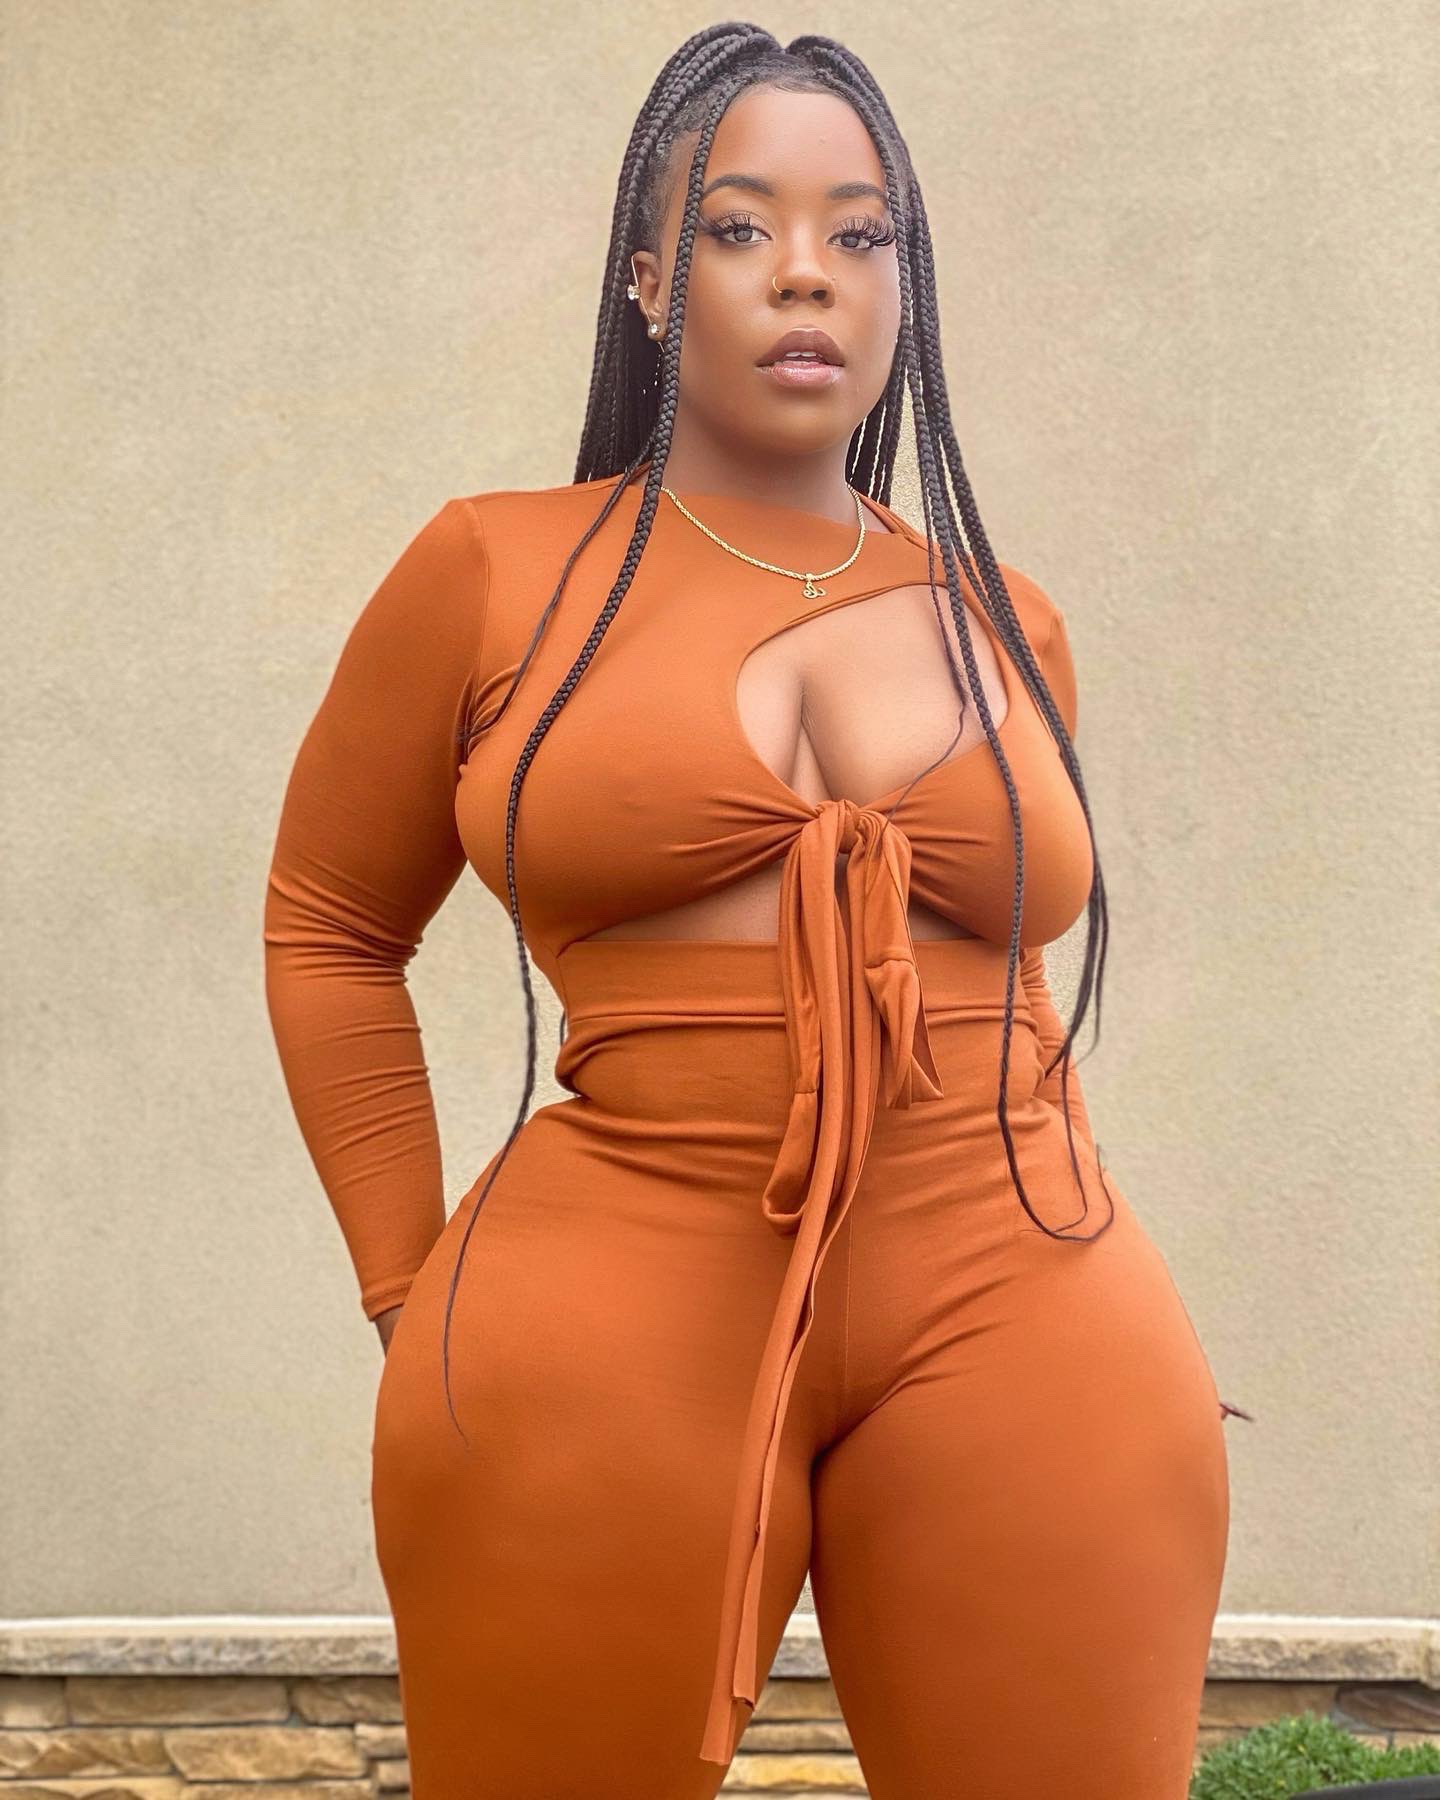 TW Pornstars - 1 pic. Coco Anise. Twitter. Giving GROWN WOMAN i dont play  with toys 💆🏾‍♀️ Jumpsuit:. 10:35 PM - 9 Nov 2021